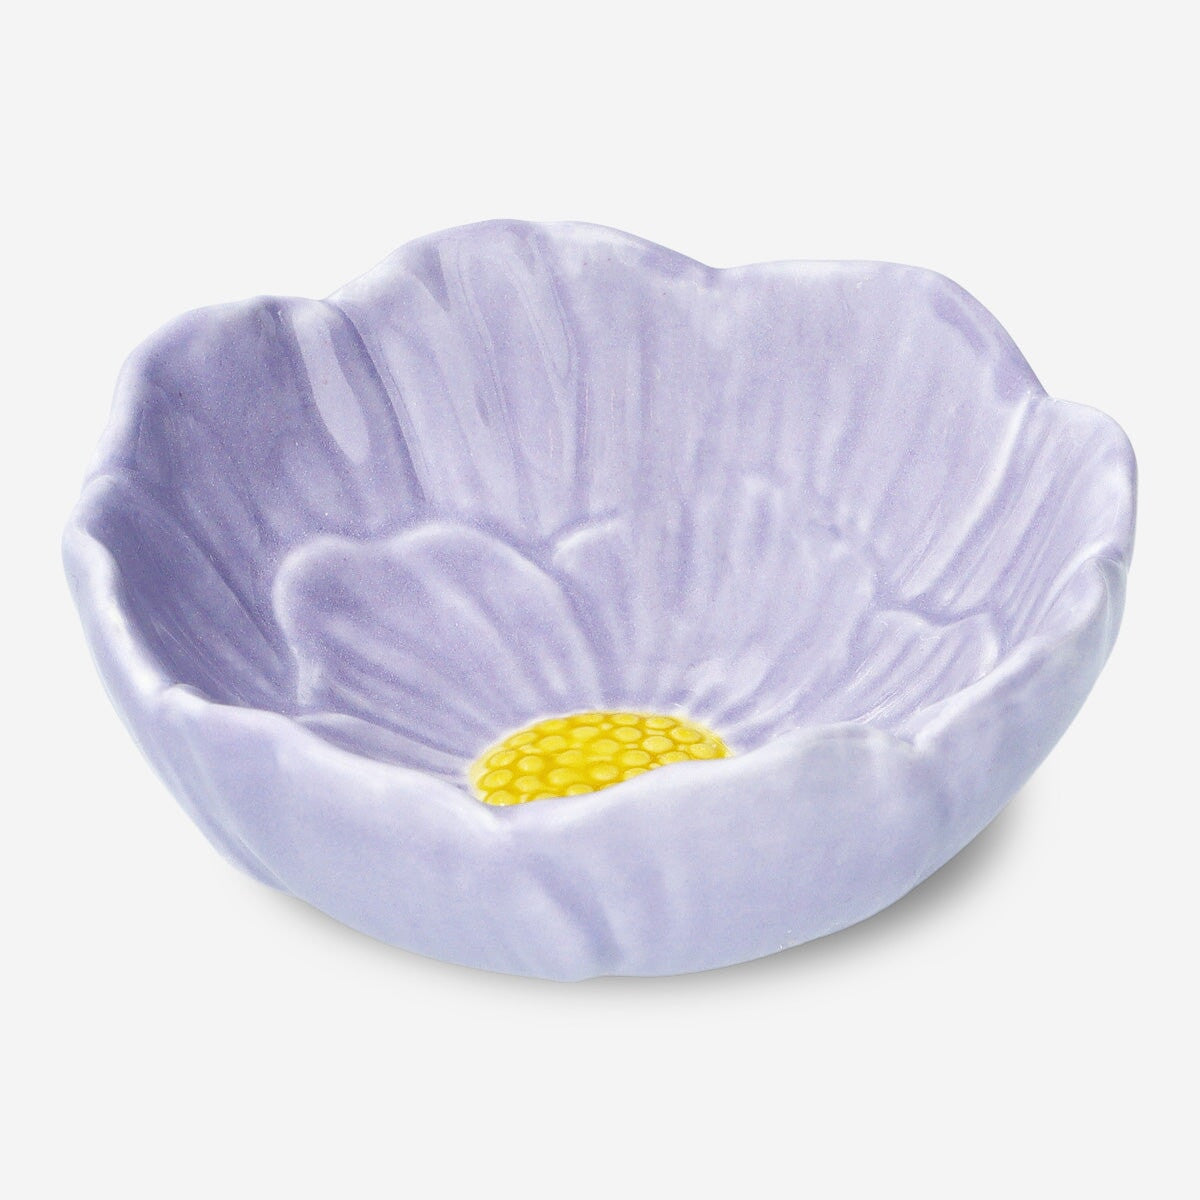 Image of Flower bowl. Small